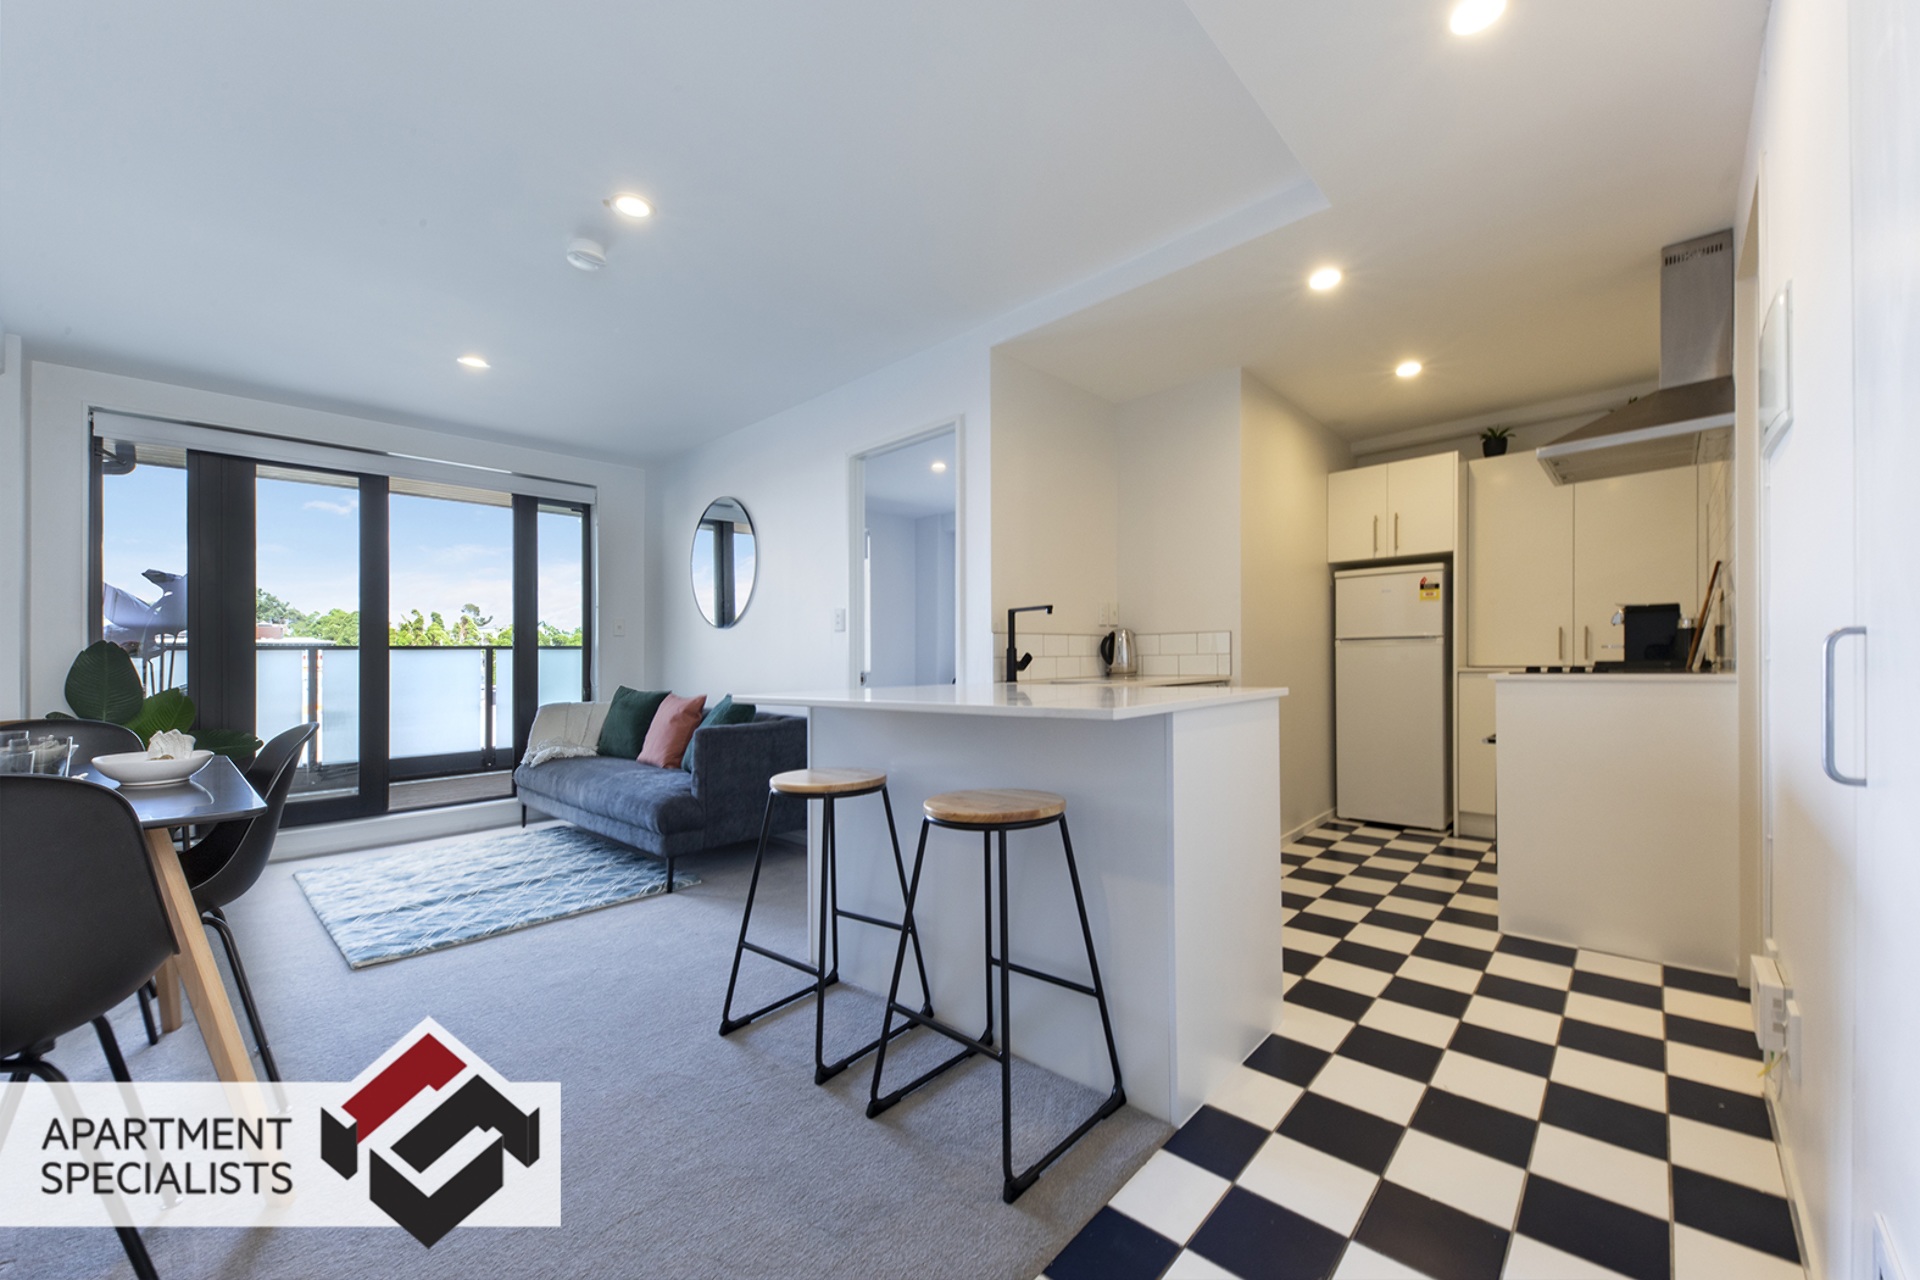 4 | 250 Richmond Road, Ponsonby | Apartment Specialists